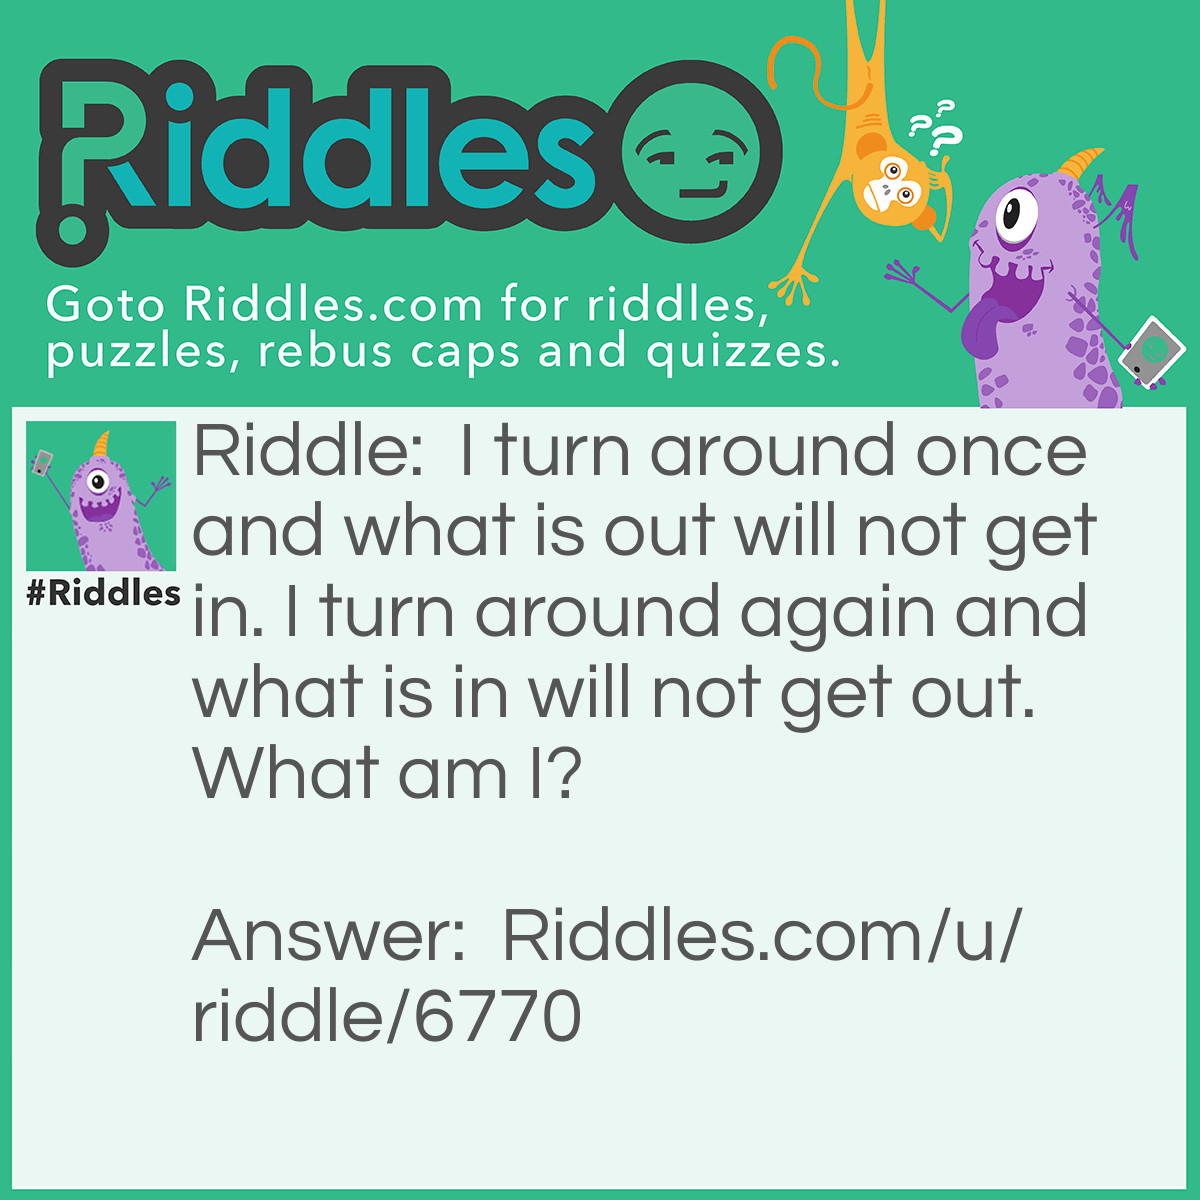 Riddle: I turn around once and what is out will not get in. I turn around again and what is in will not get out. What am I? Answer: A key.